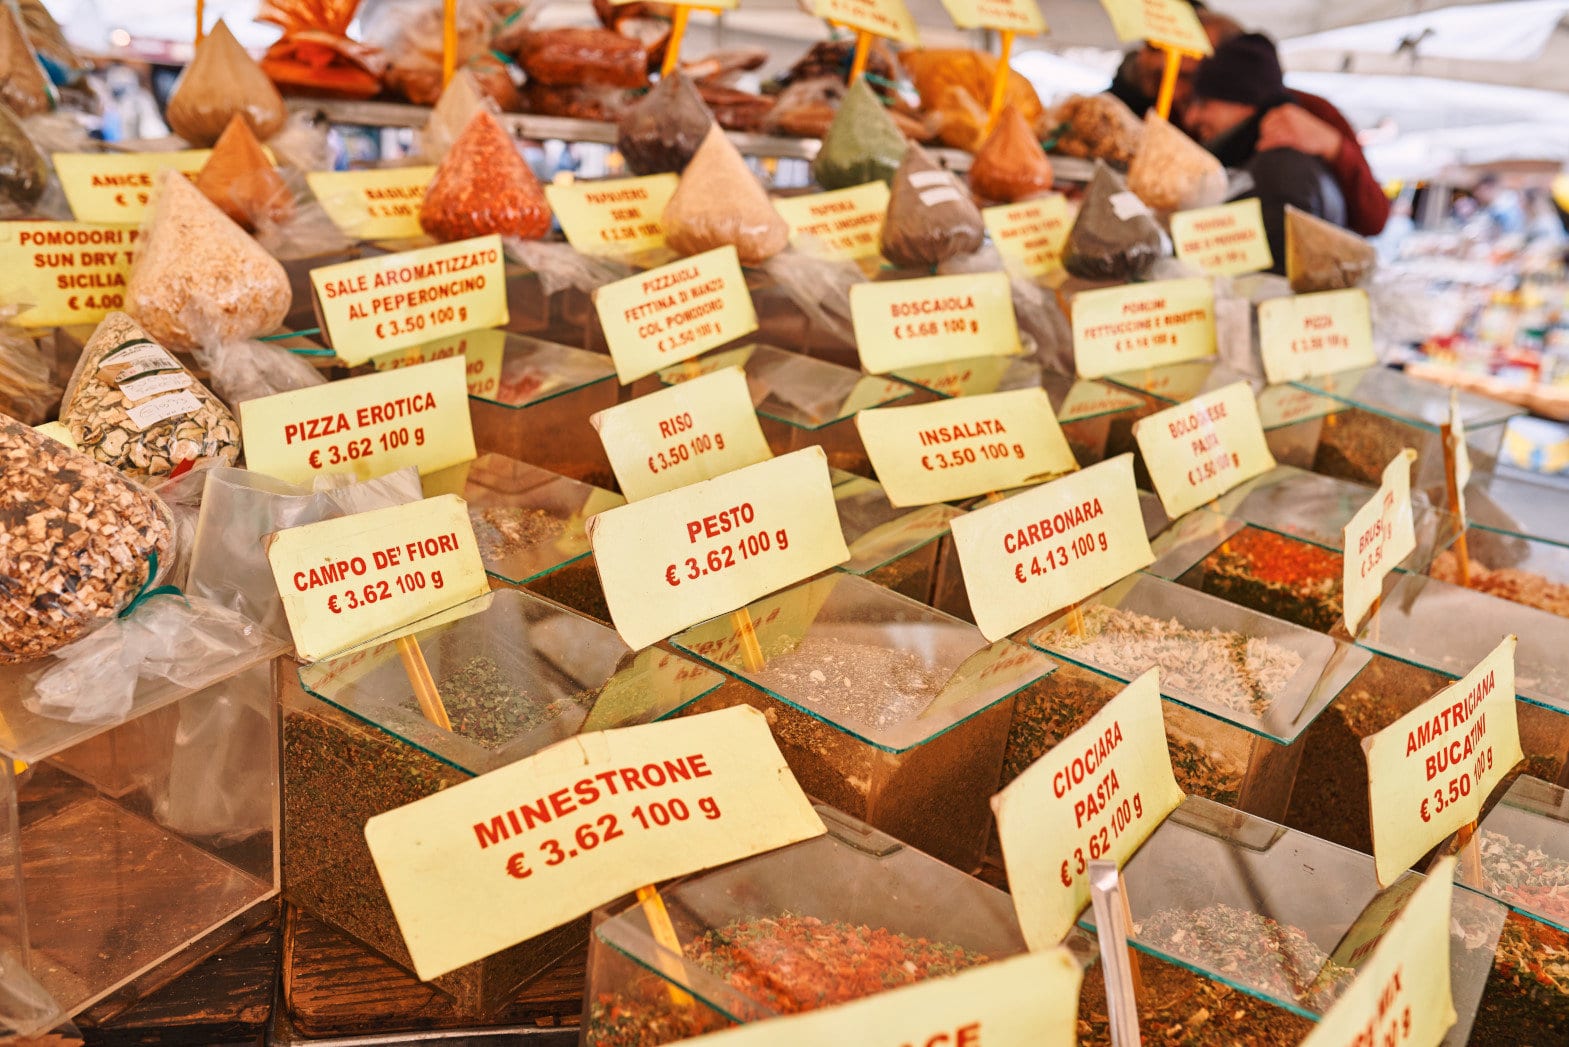 Rome, traditional outdoor food market of Campo de Fiori (fields of flower), spice stand